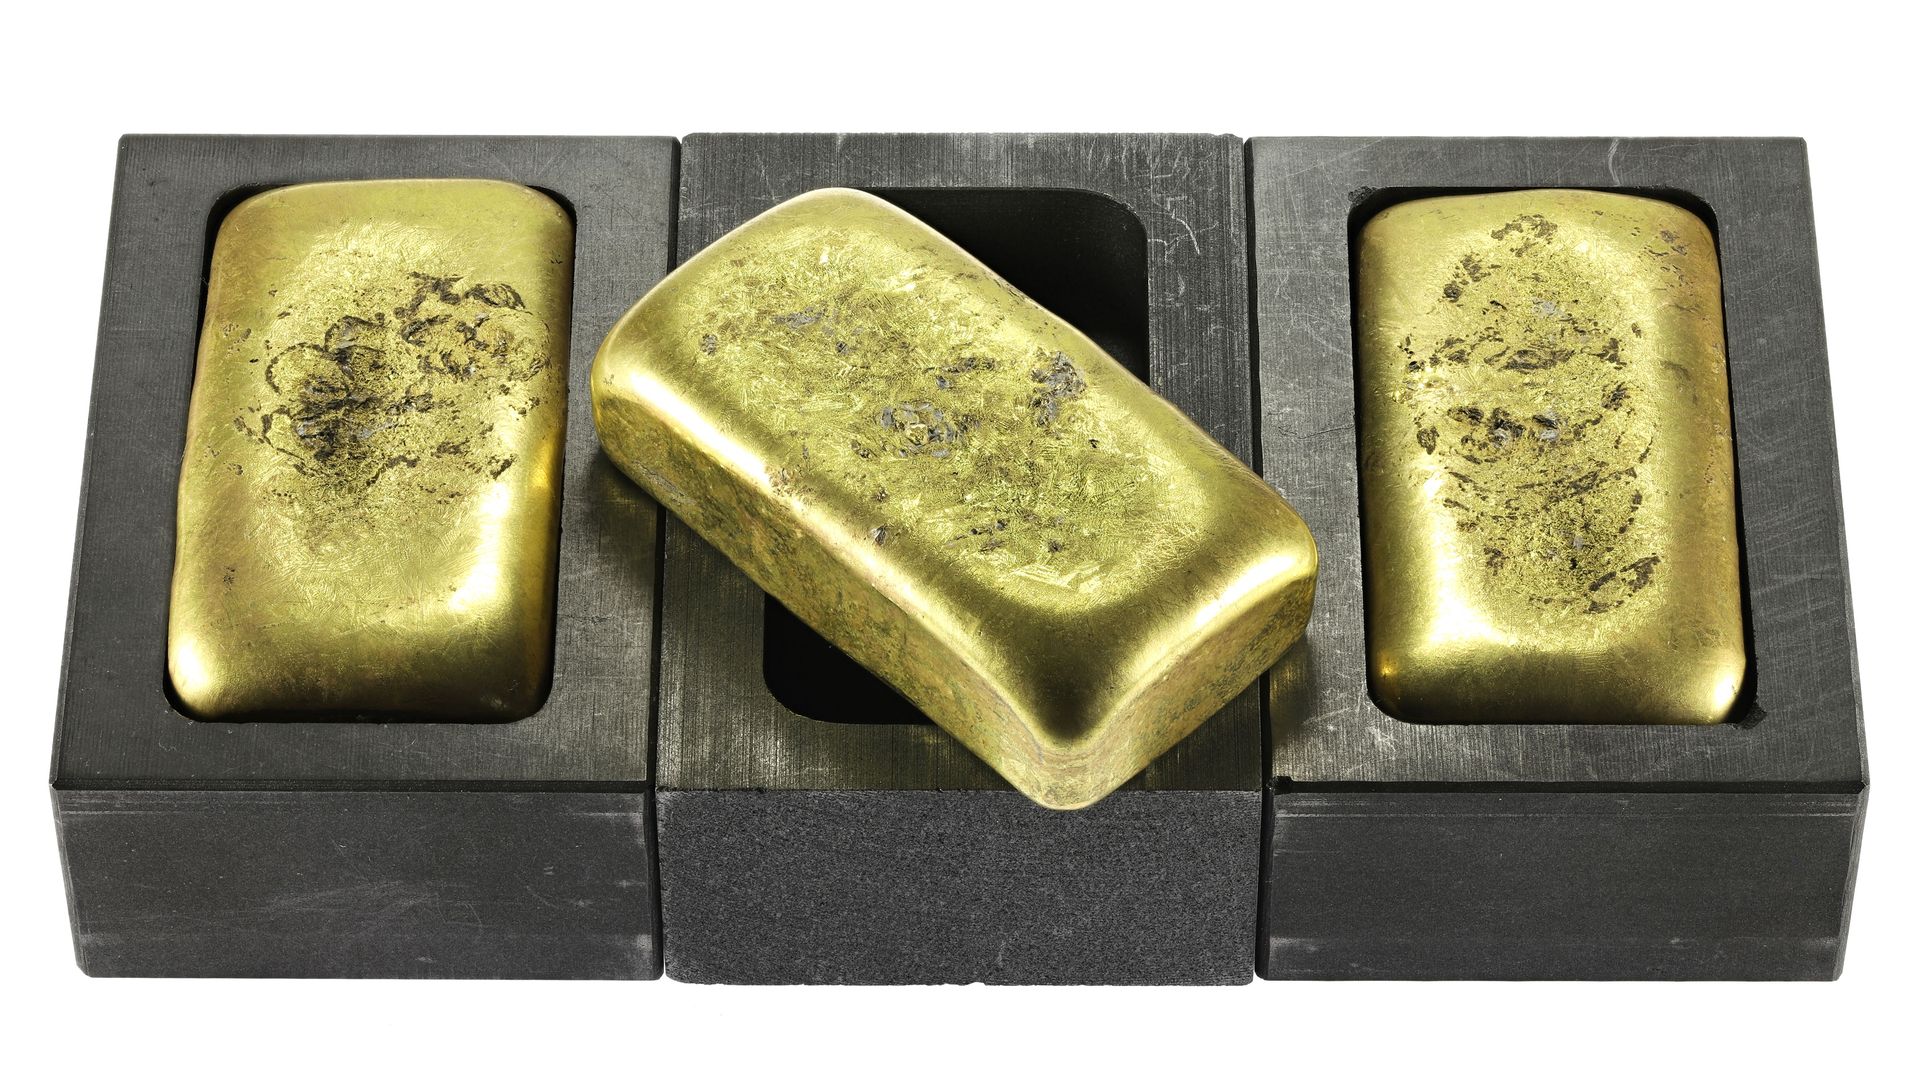 UK-listed RMAU has half of its holdings in recycled gold teaser image